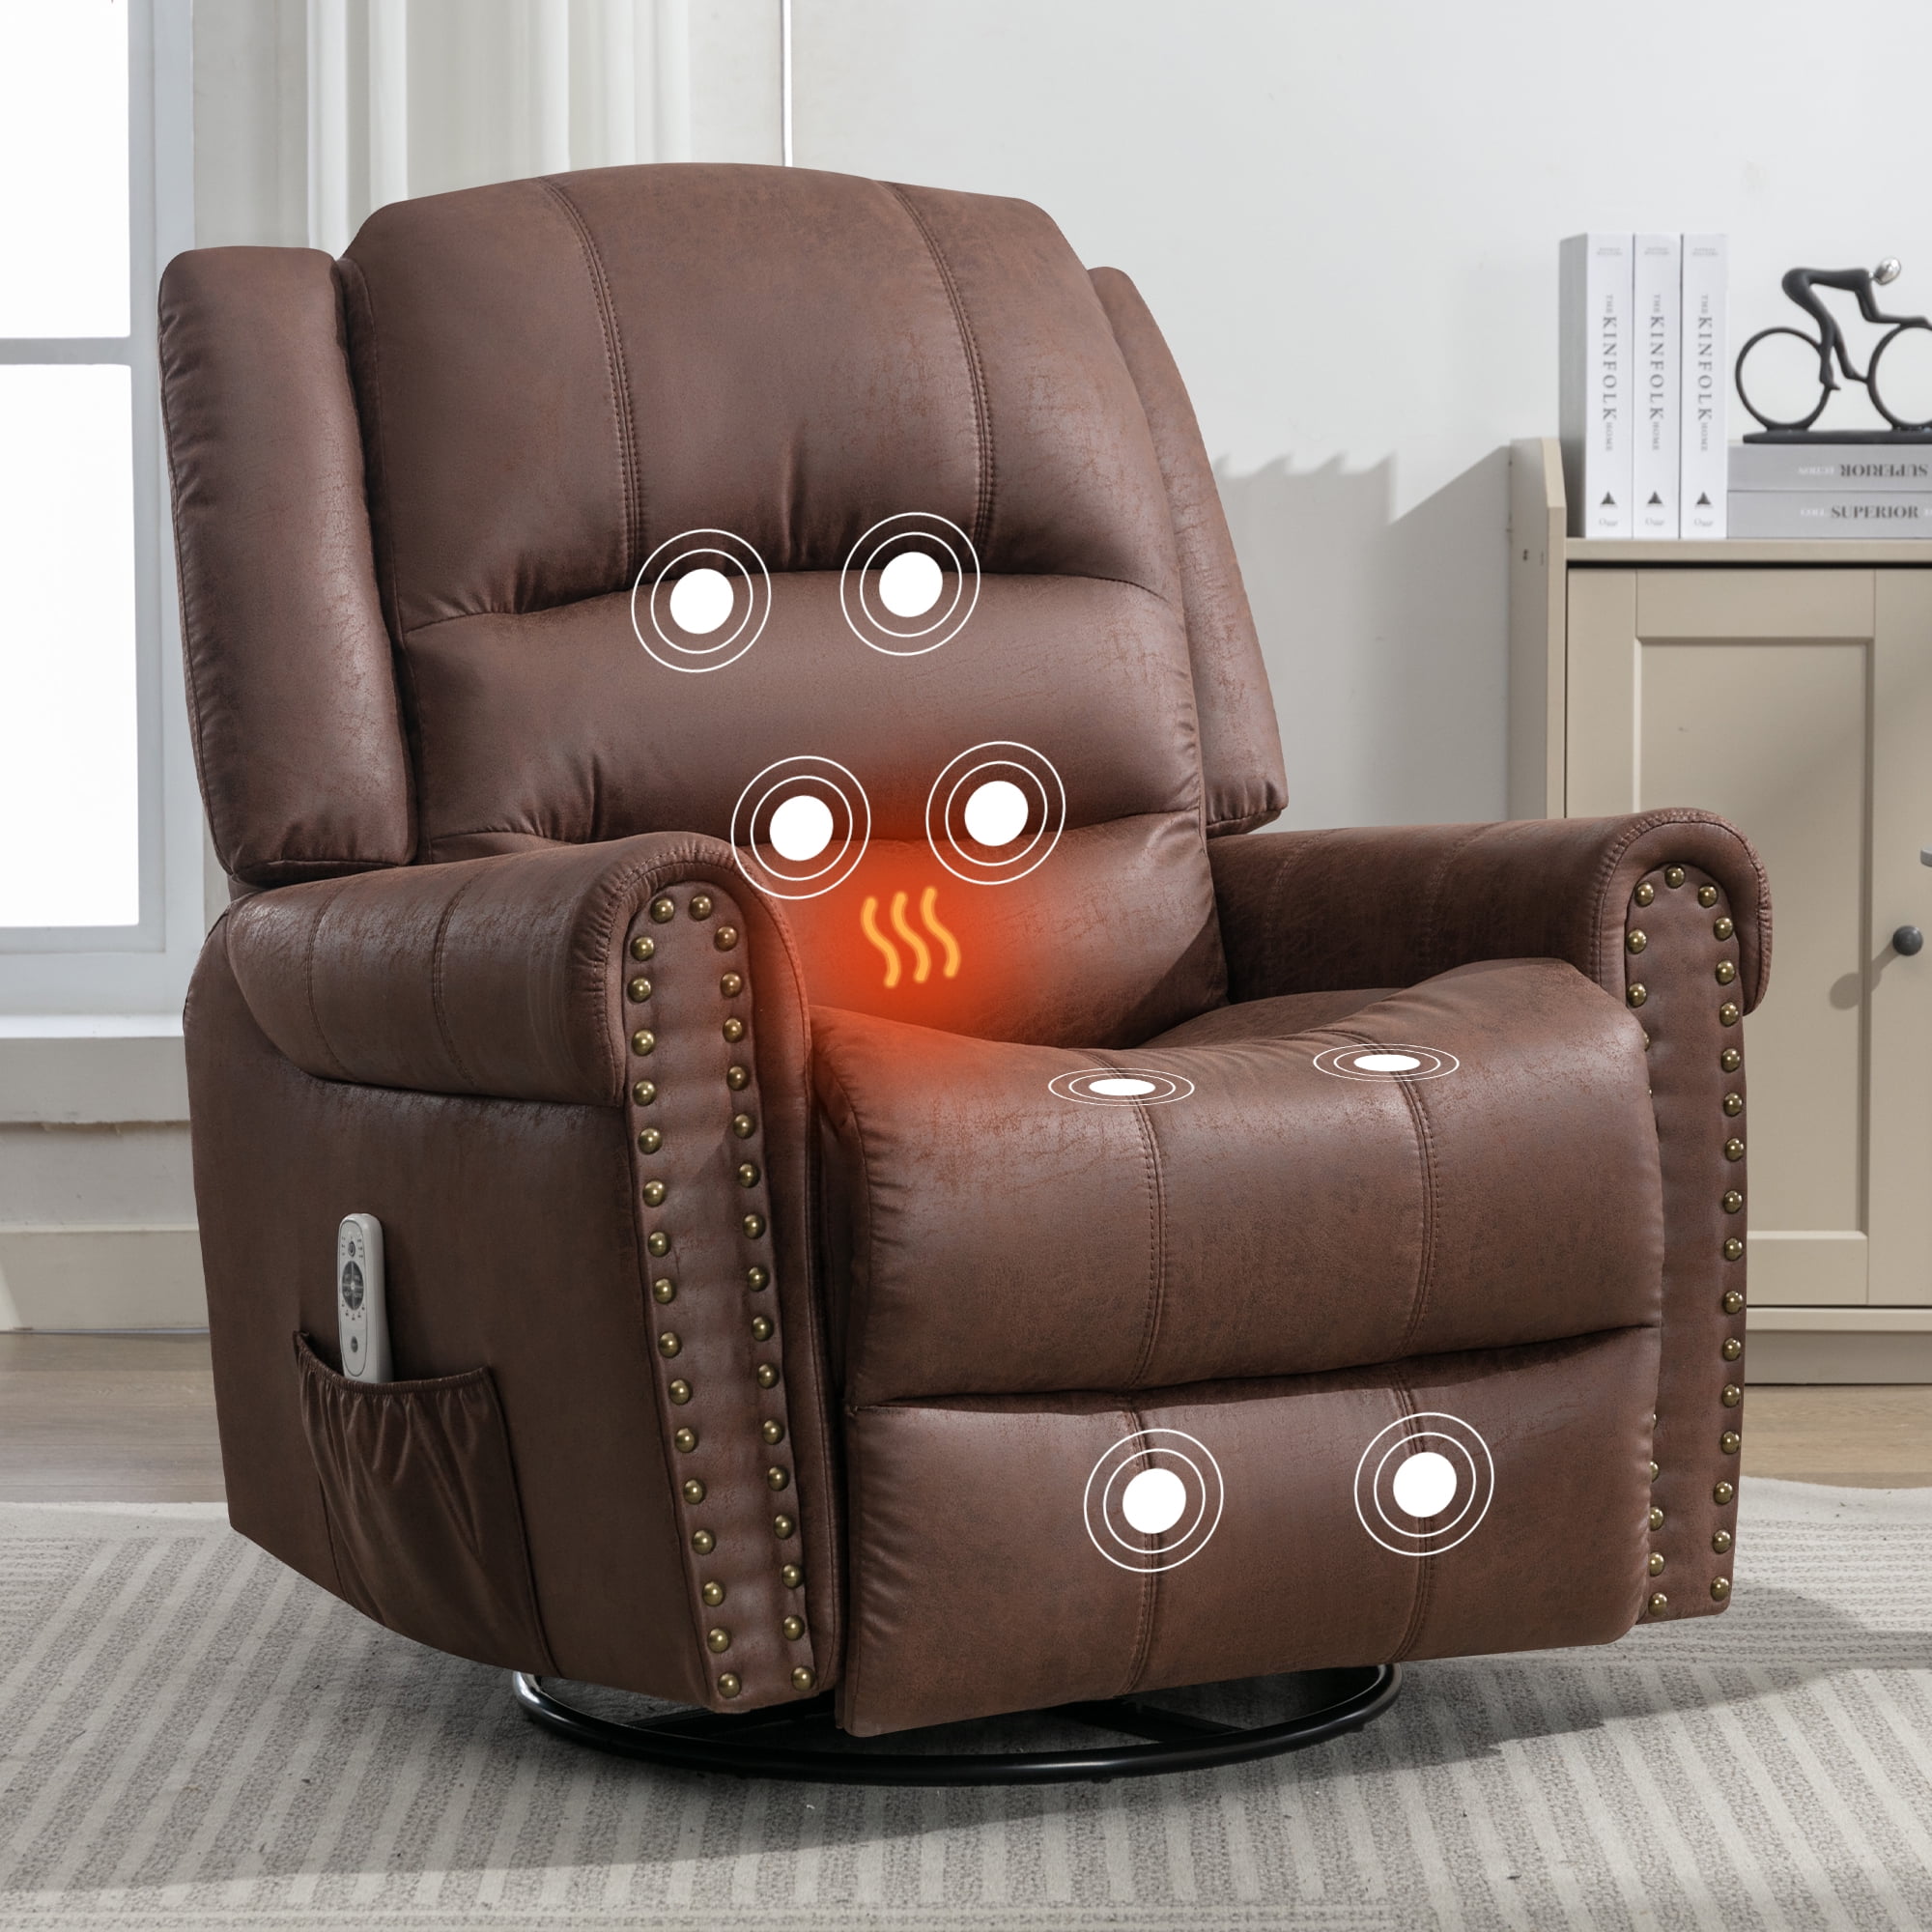 YONISEE Large Lift Chairs Recliner for Elderly - Dual Motor Power Lift Chair  Modern with Massage and Heat, Extended Footrest, 3 Positions, 2 Side  Pockets, and Cup Holders, USB Ports, Brown 